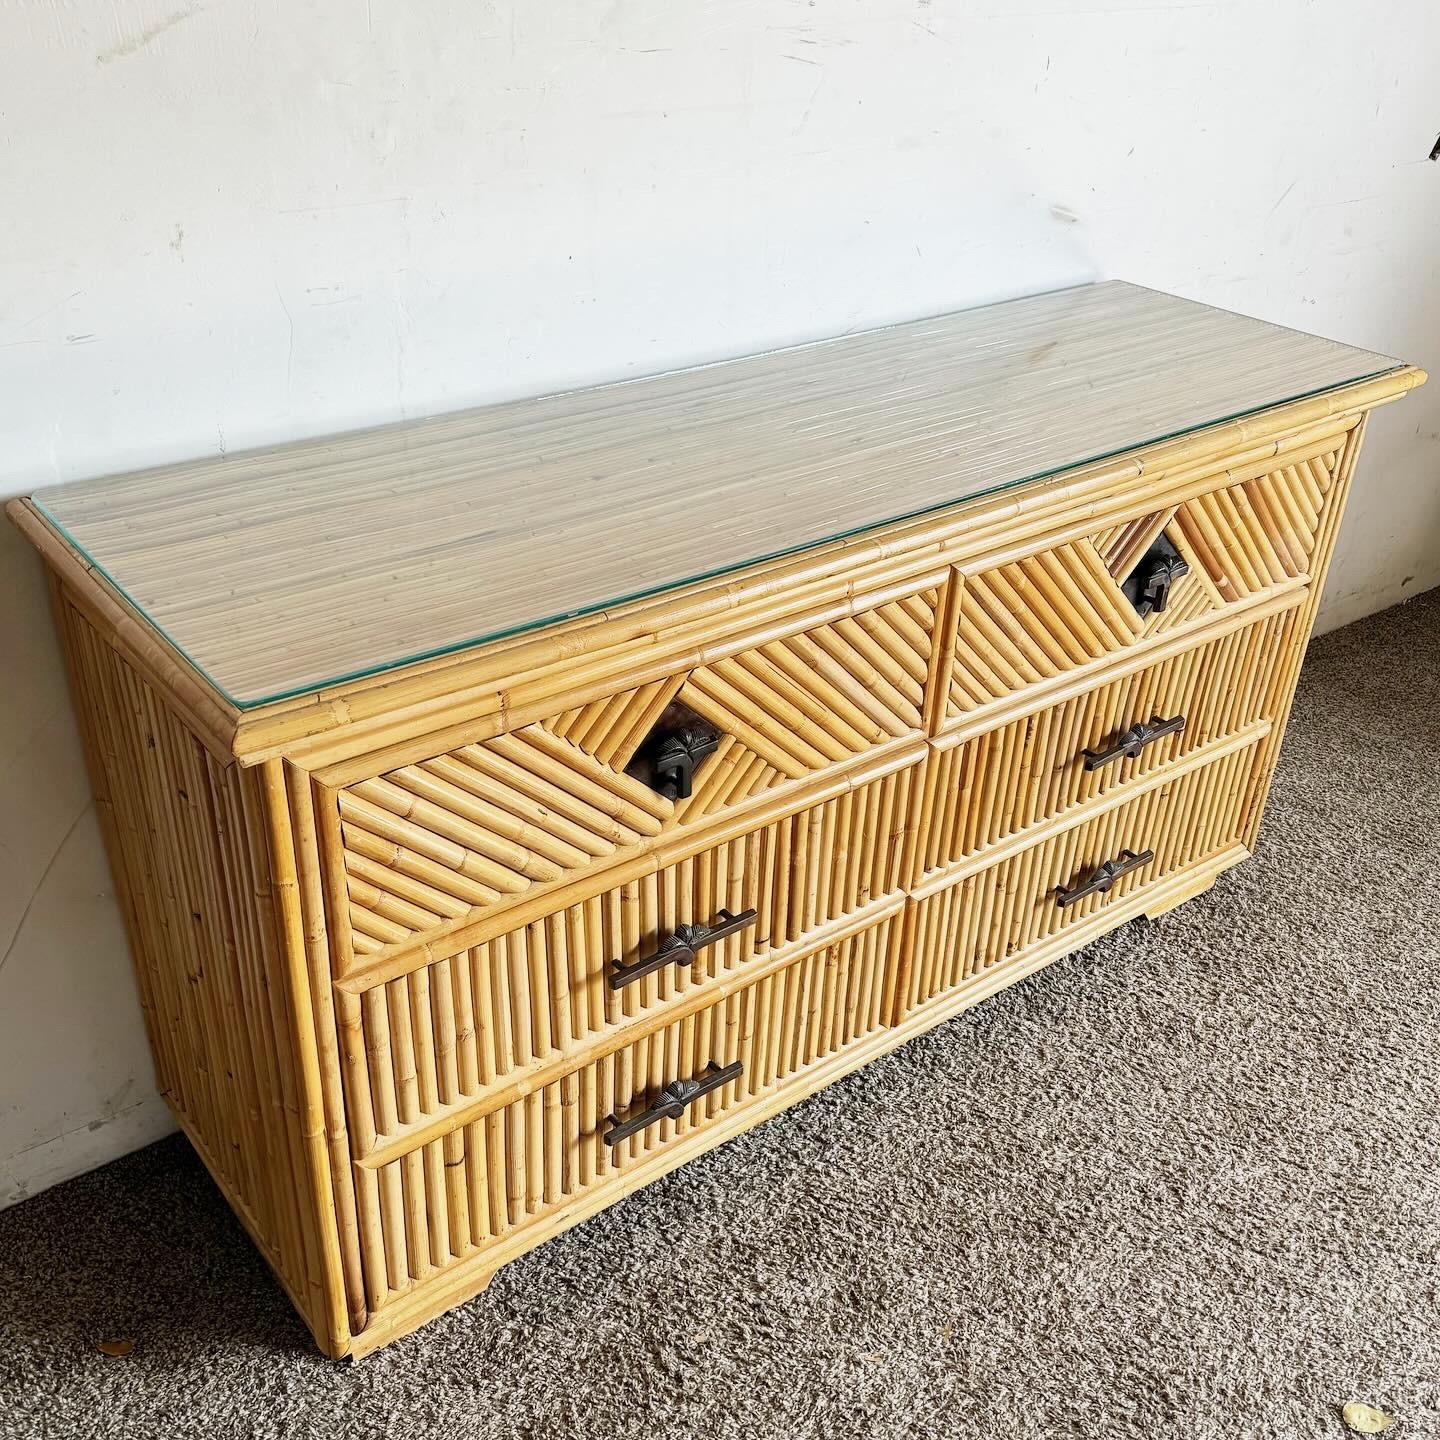 Boho Chic Bamboo and Pencil Reed Credenza With Hut Hutch/Etagere/Caninet In Good Condition For Sale In Delray Beach, FL